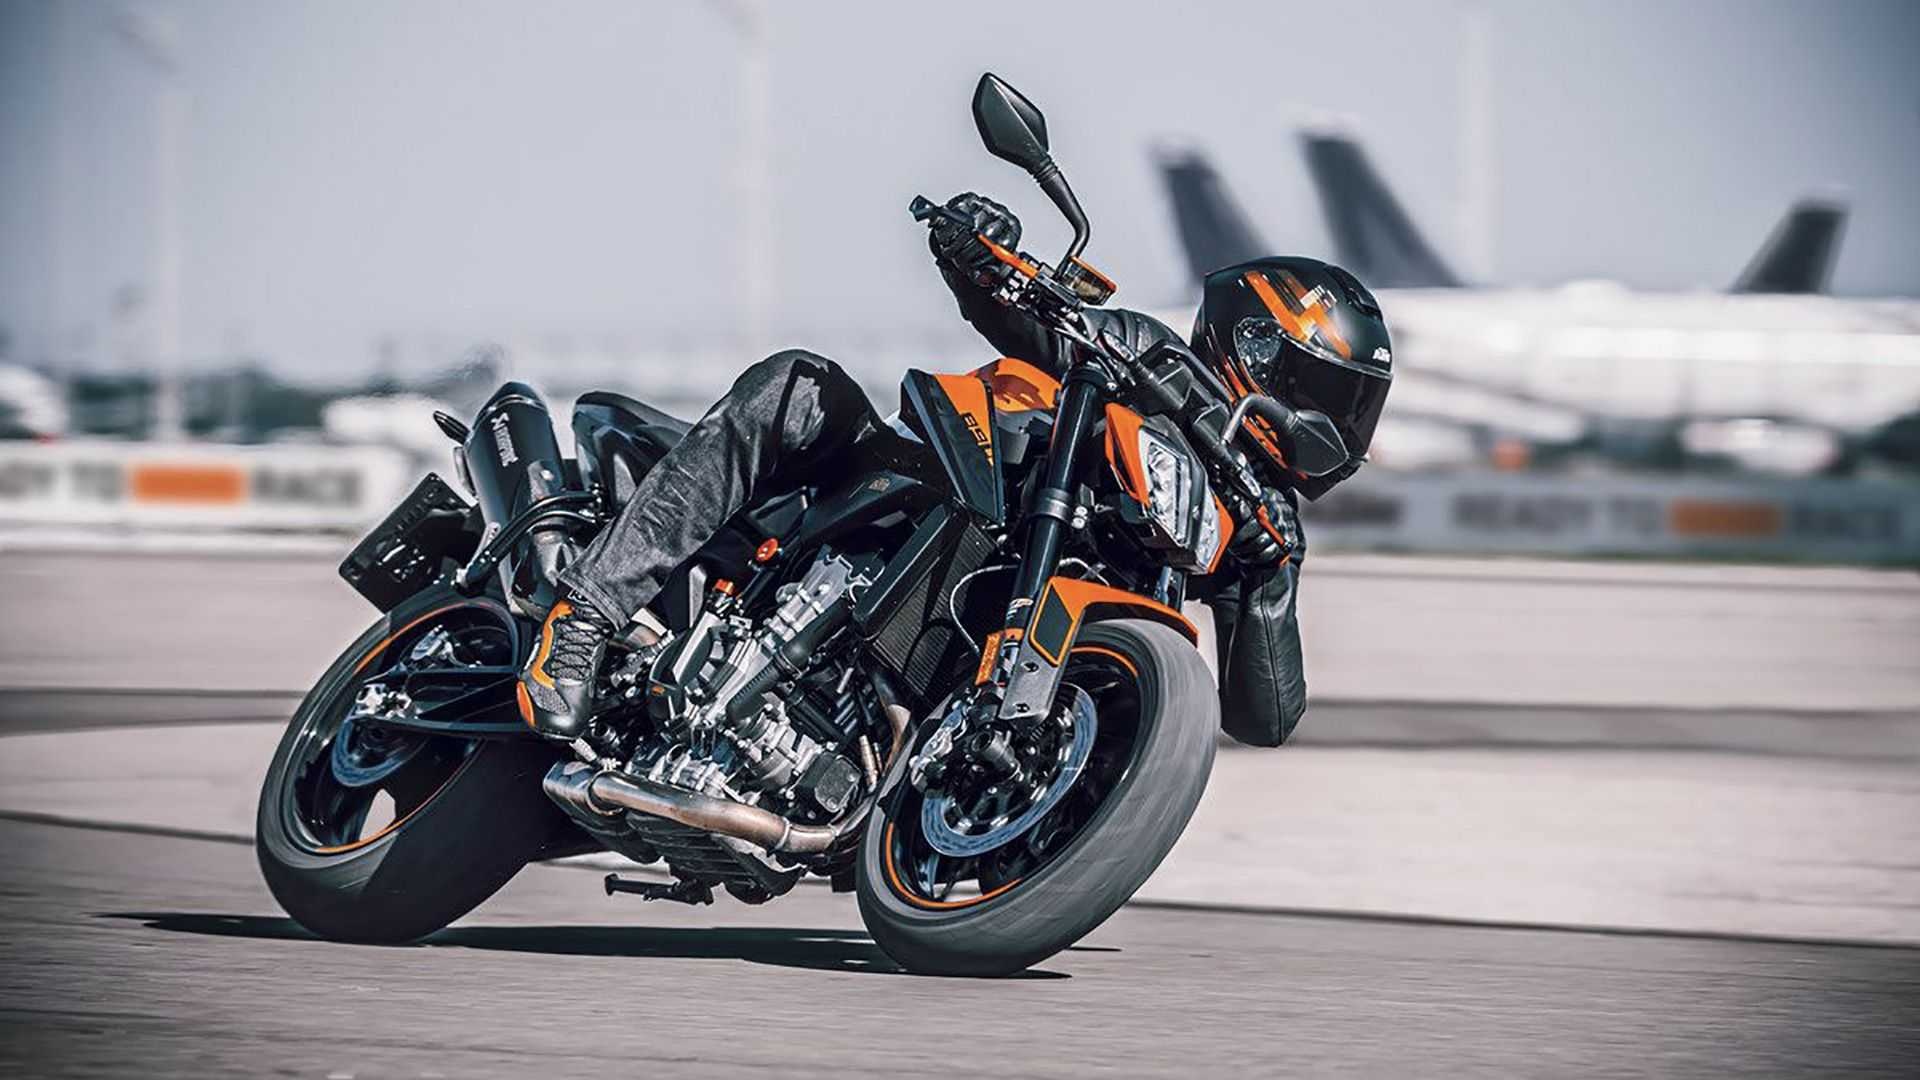 KTM 890 Duke, Latest release, Exciting features, Motodor's review, 1920x1080 Full HD Desktop